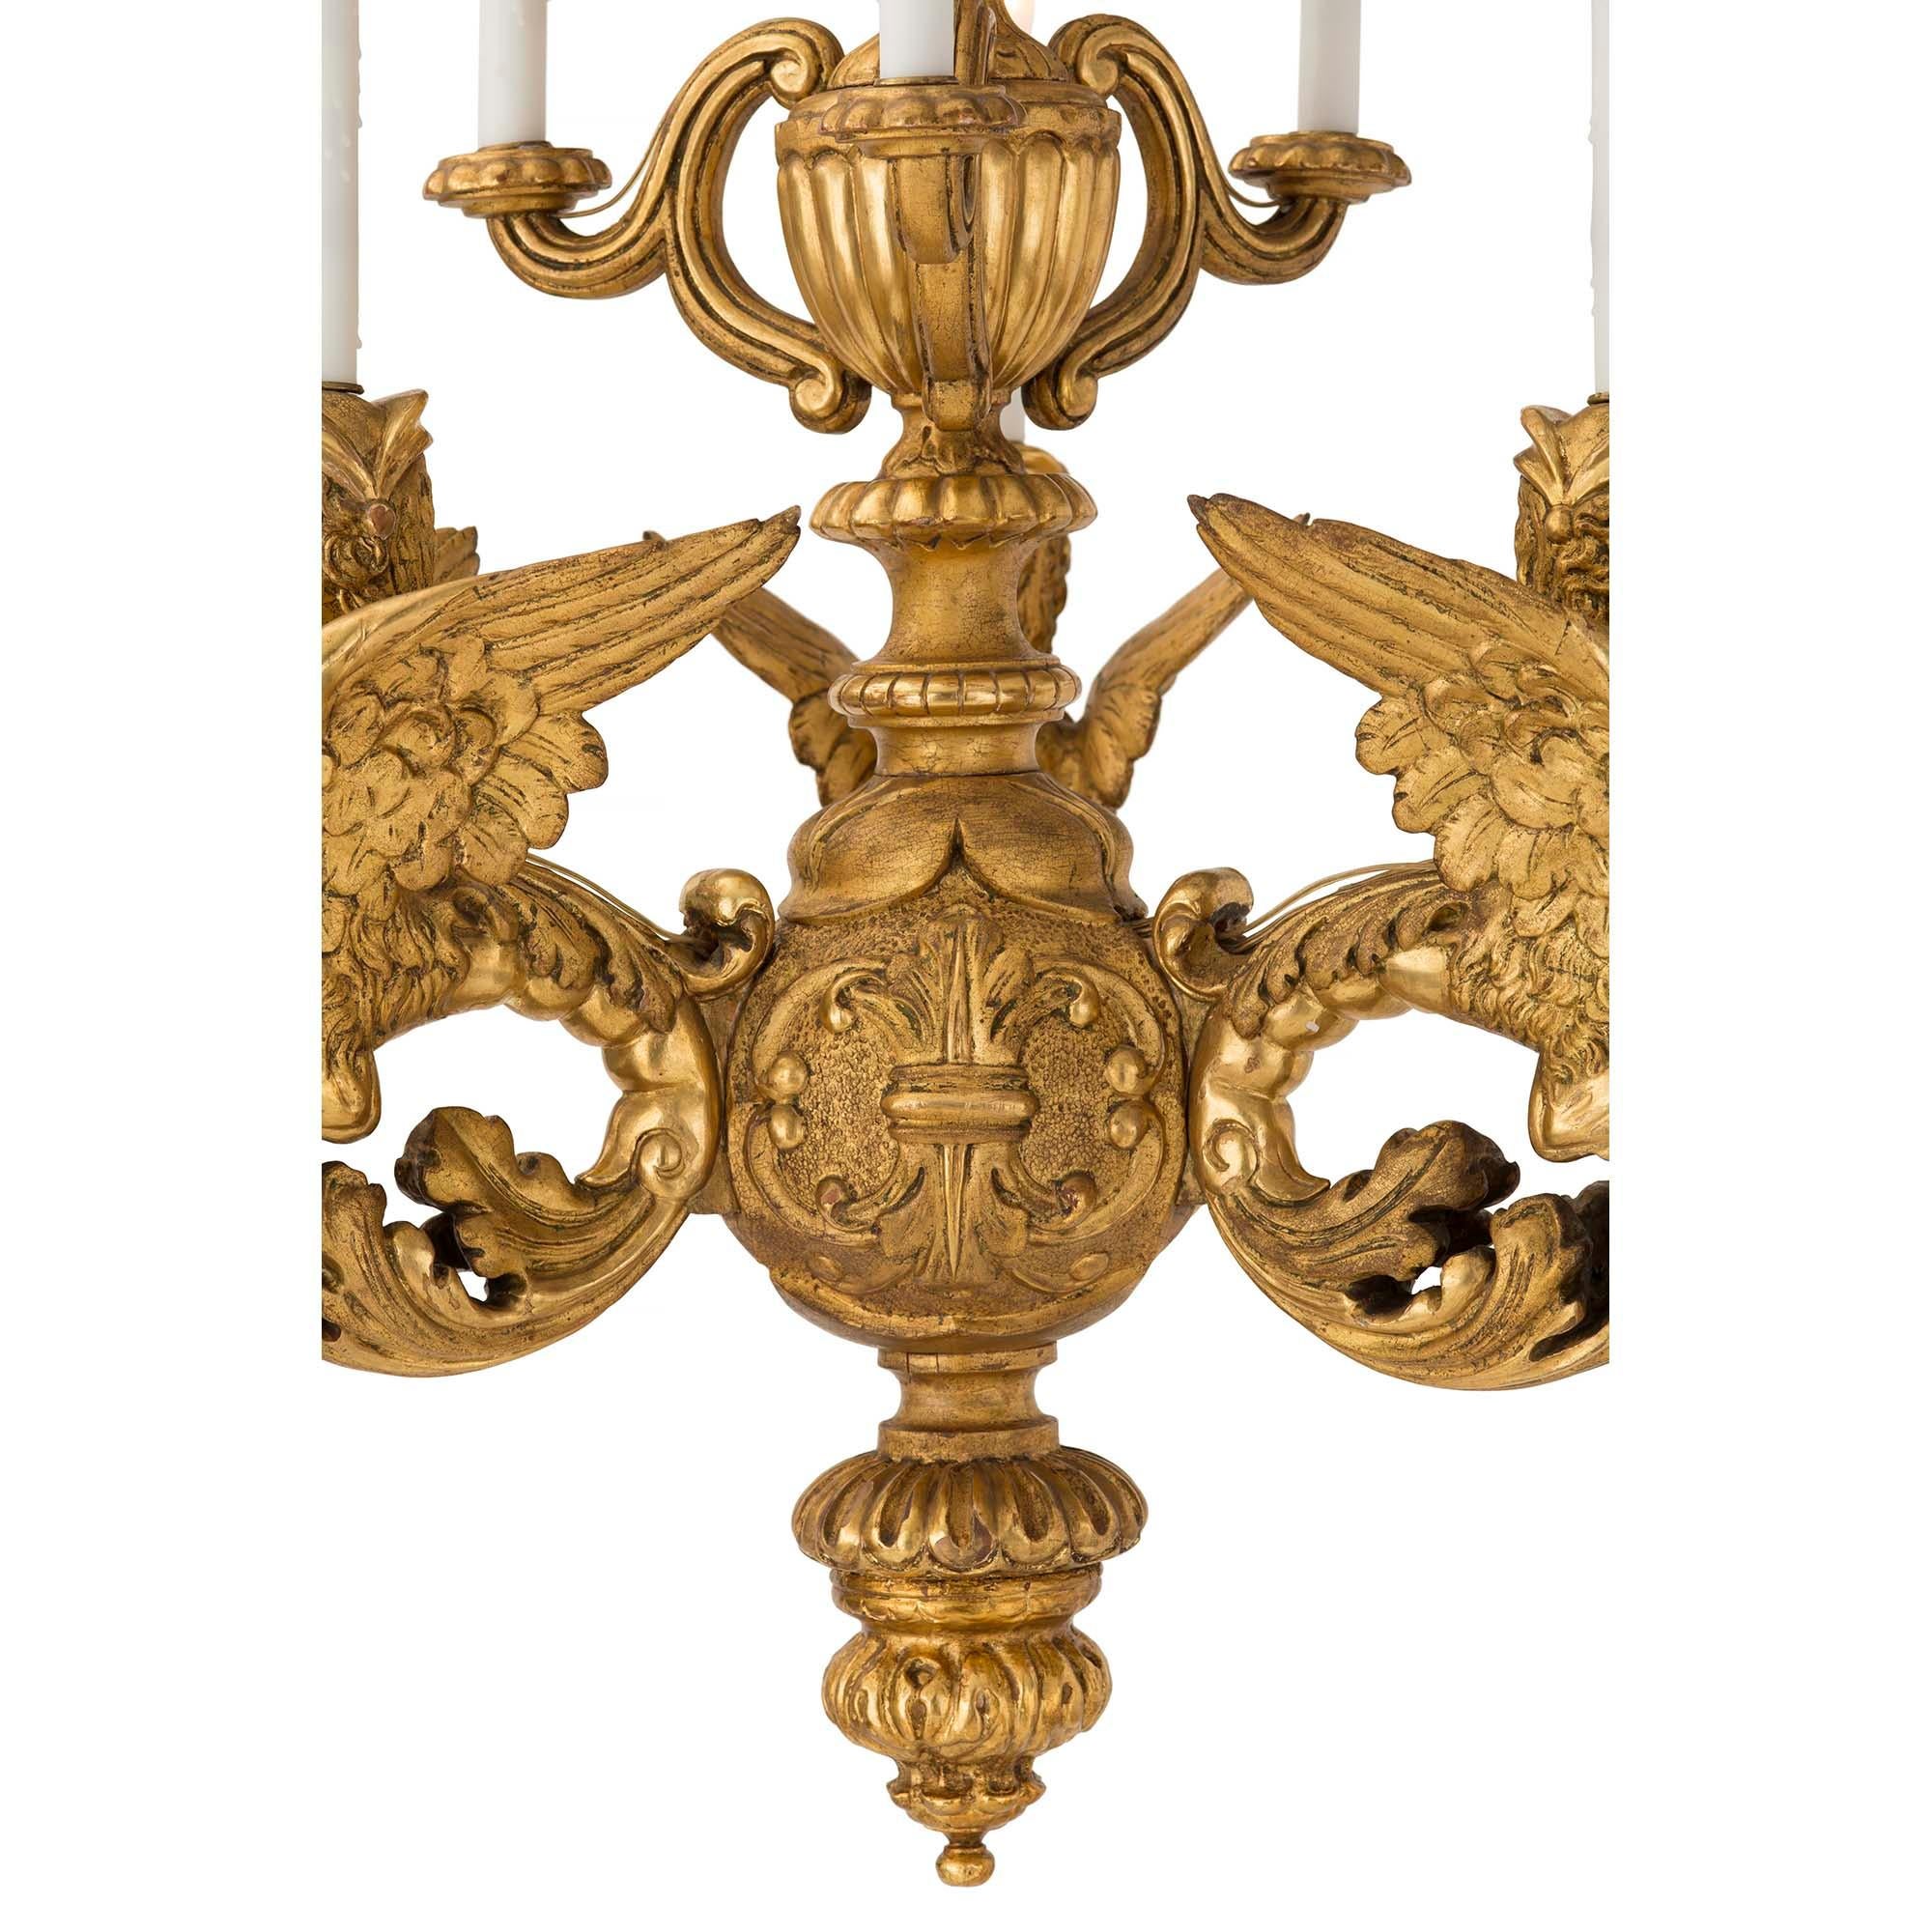 A high quality and extremely decorative early 19th century Italian Baroque giltwood chandelier. The chandelier with three different levels of lights has ten electrified arms. The bottom finial with carved foliate designs is below a large ball with